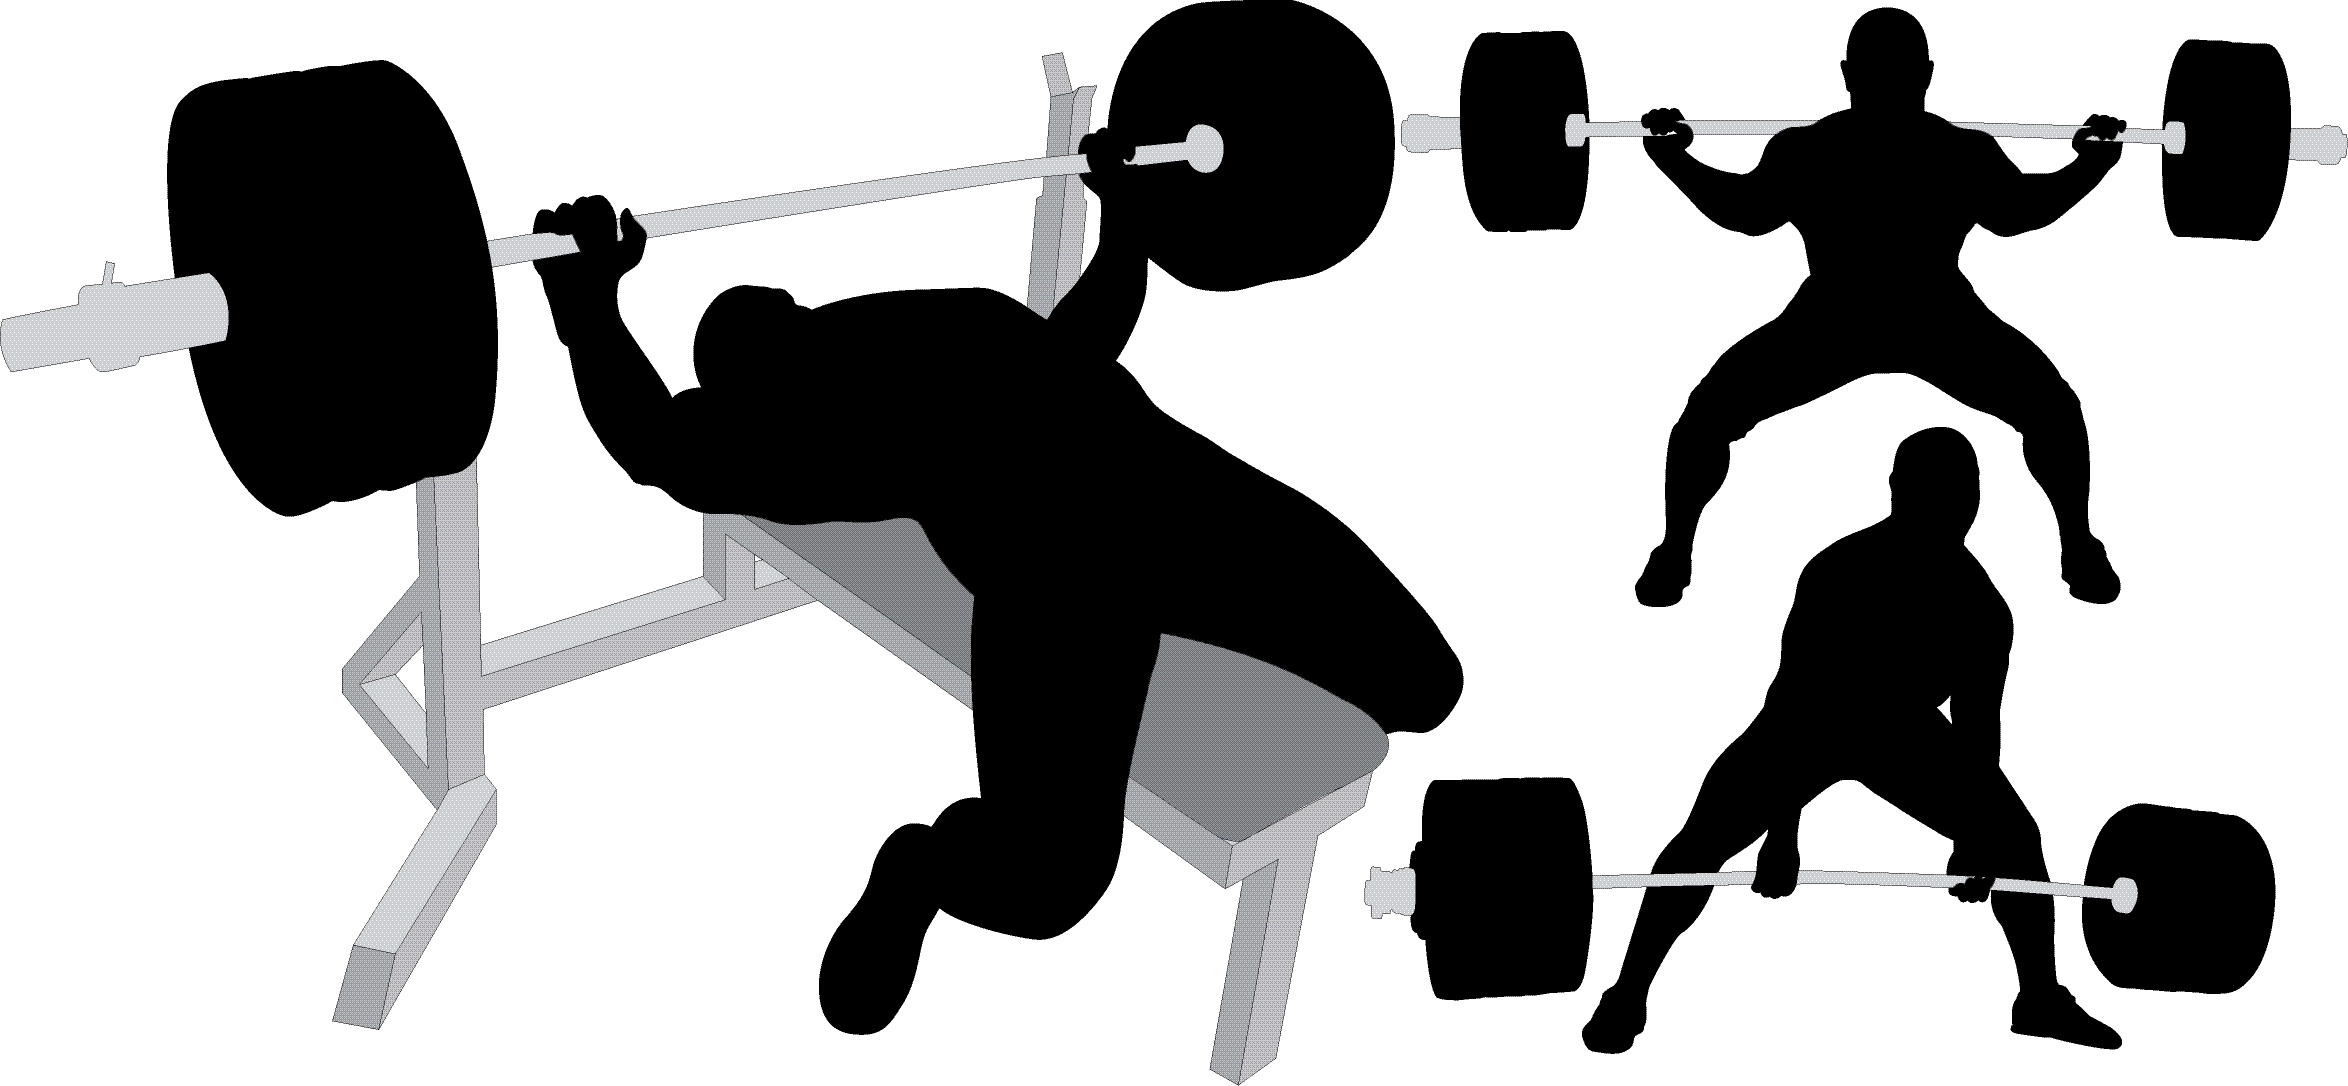 Powerlifting Cartoon Images - Cliparts.co